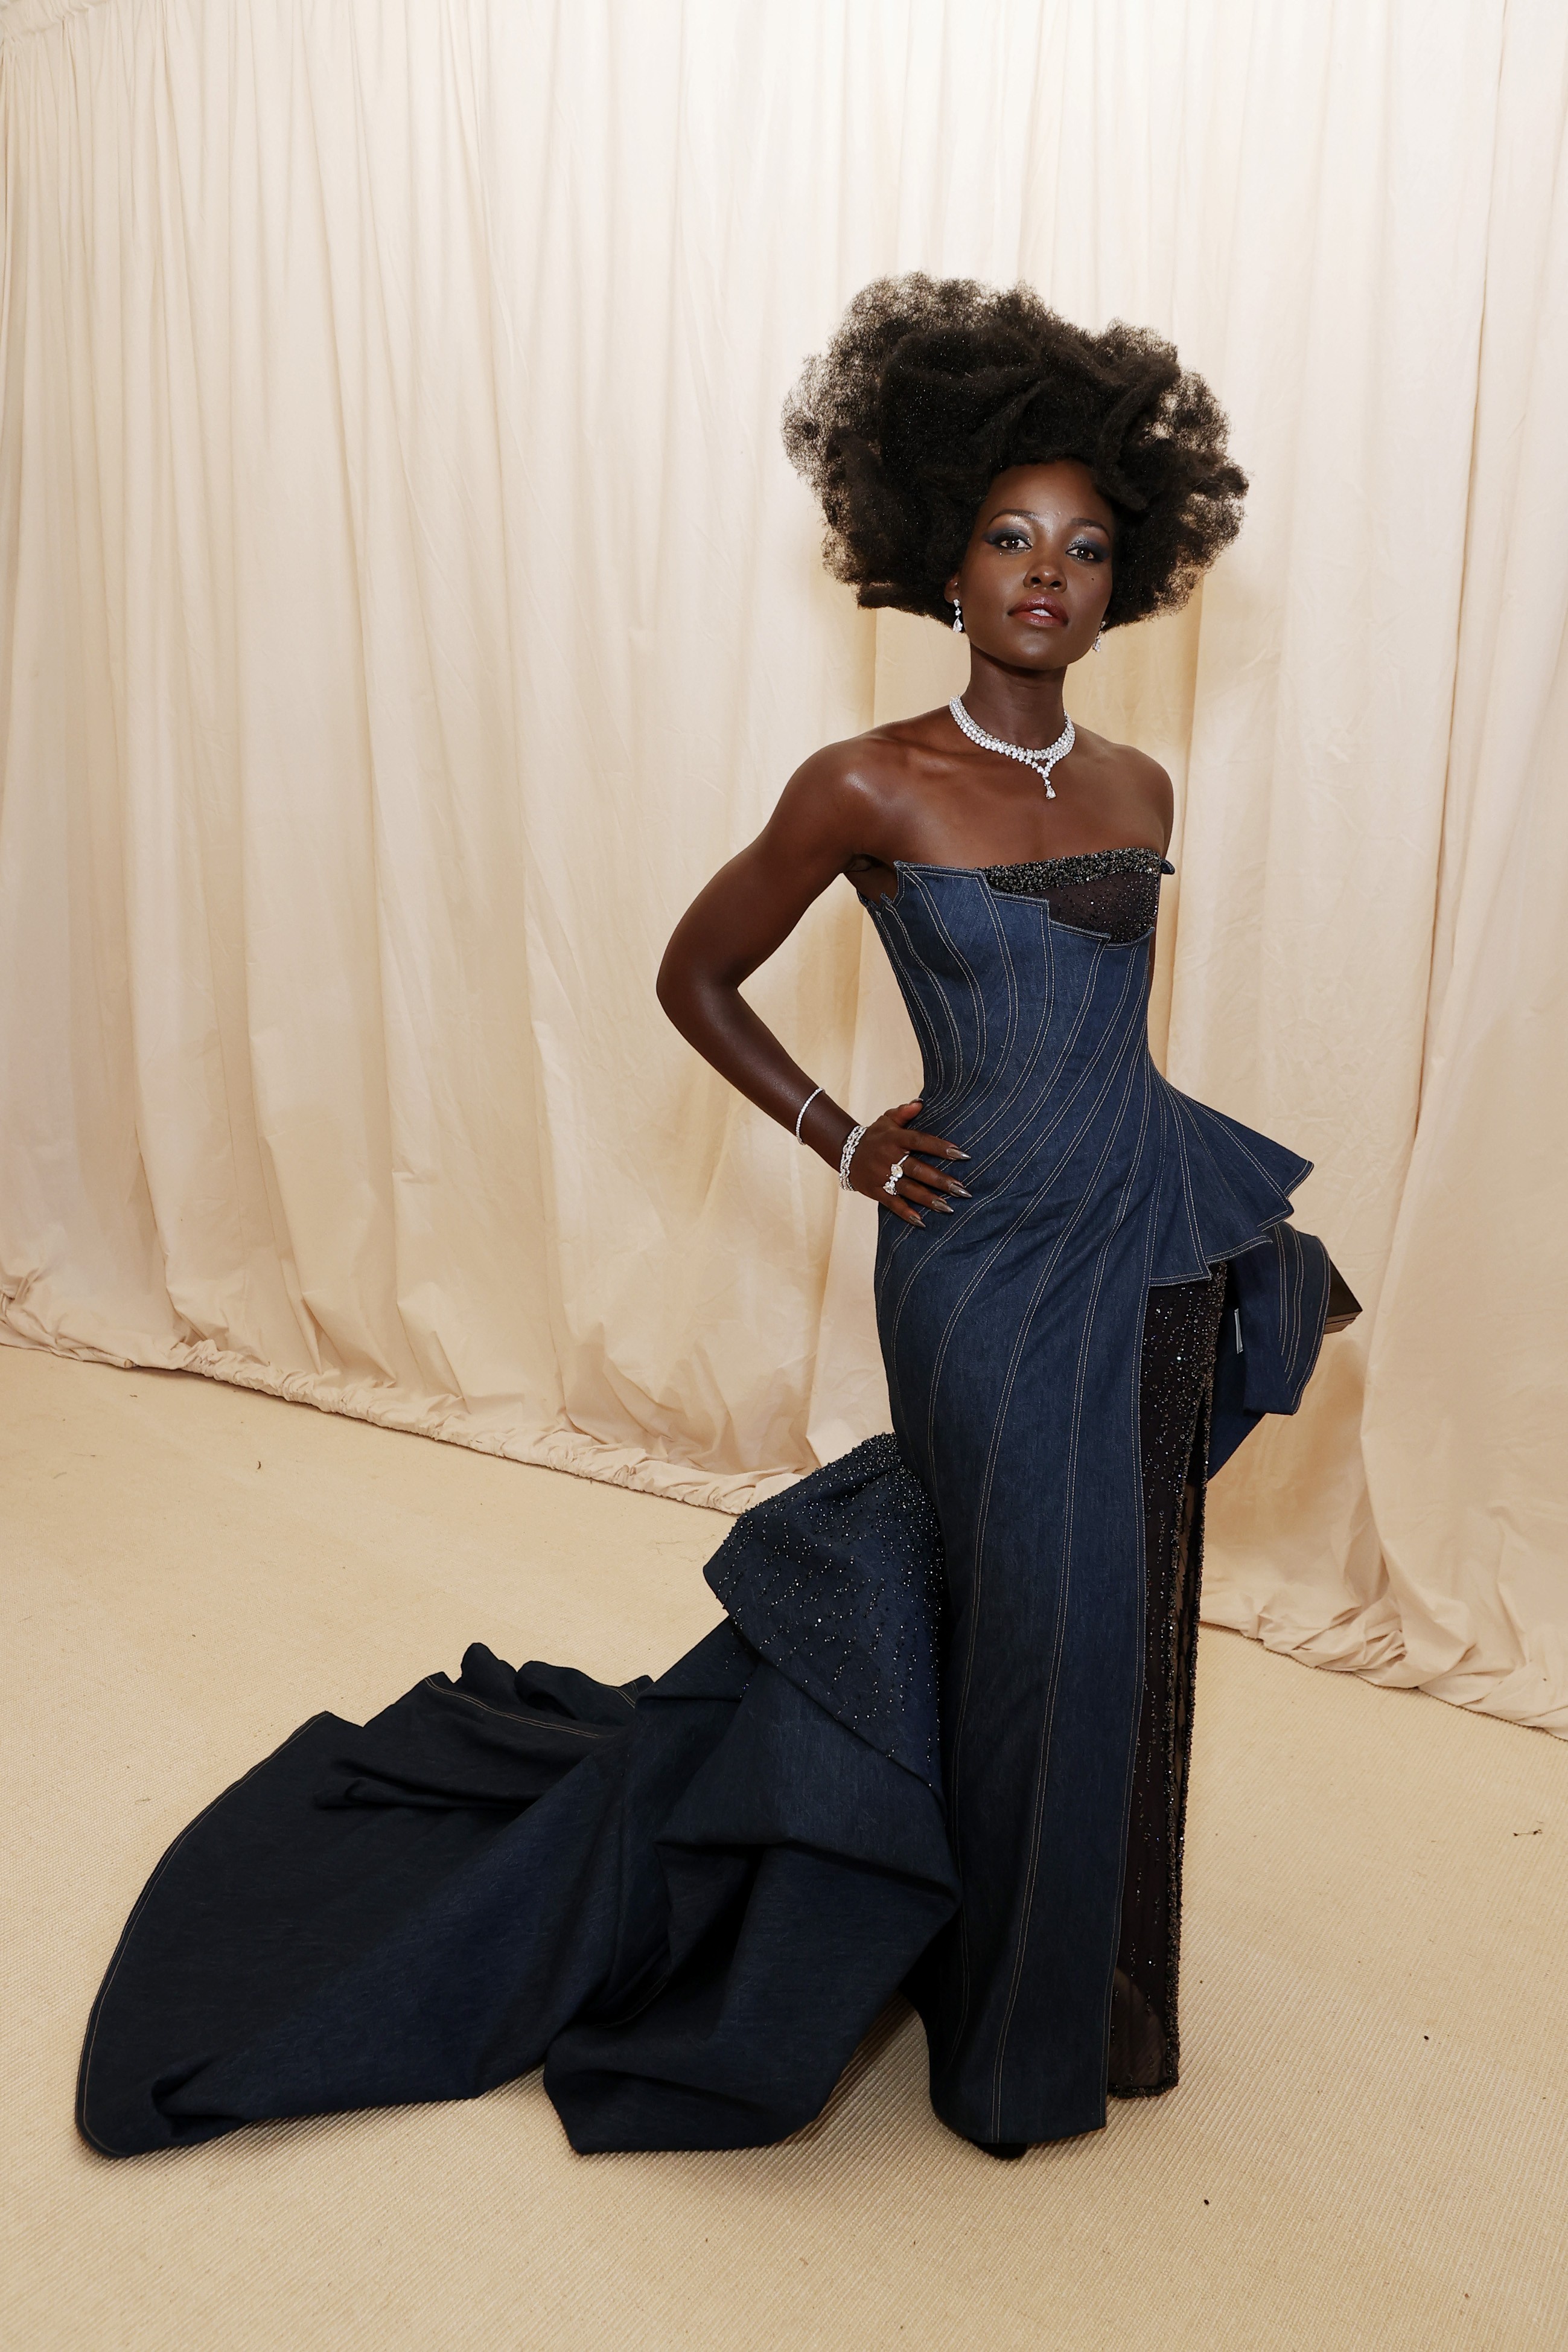 Lupita Nyong'o de look total jeans Versace (Foto: Getty Images)